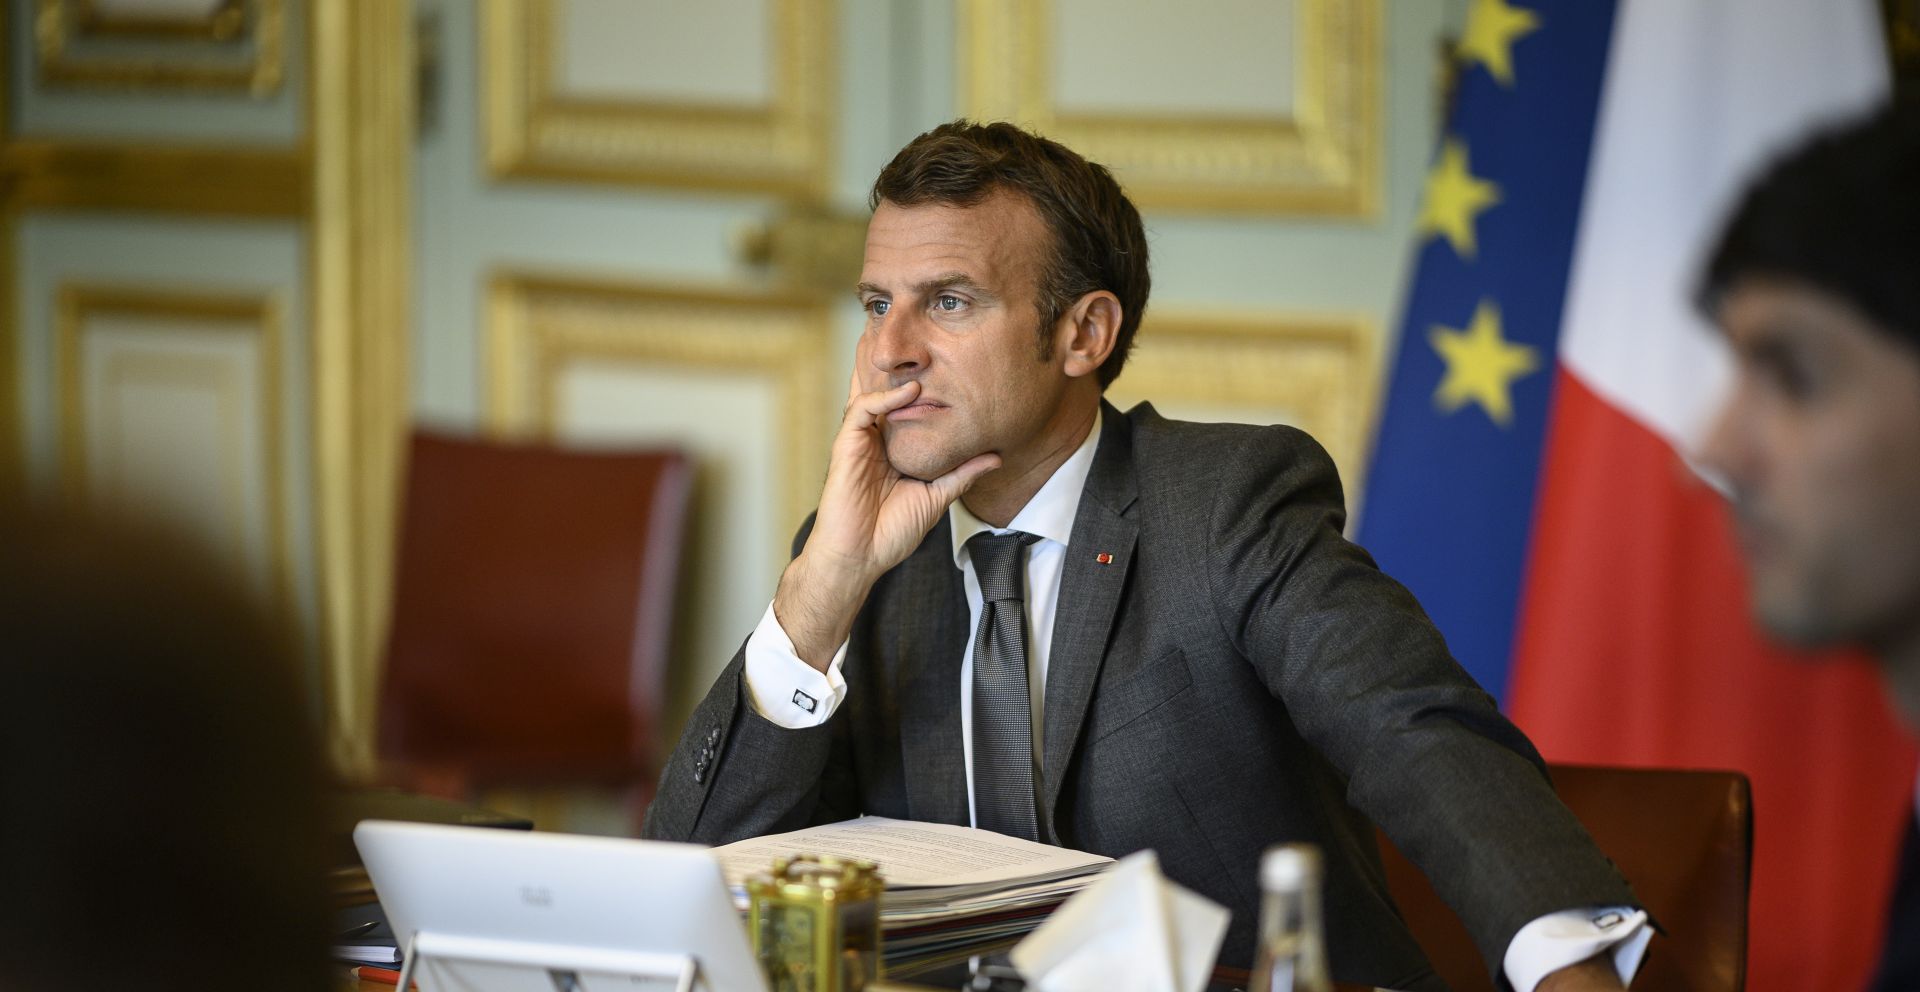 epa08495172 French President Emmanuel Macron (C) during an European Council by videoconference in Paris, France, 19 June 2020. In the video conference, the leaders are discussing the creation of a fund to help member states recover from the economic impact of the ongoing COVID-19 pandemic caused by the SARS-CoV-2 coronavirus, as well as lay out a new long-term budget for the bloc.  EPA/ELIOT BLONDET/ POOL MAXPPP OUT